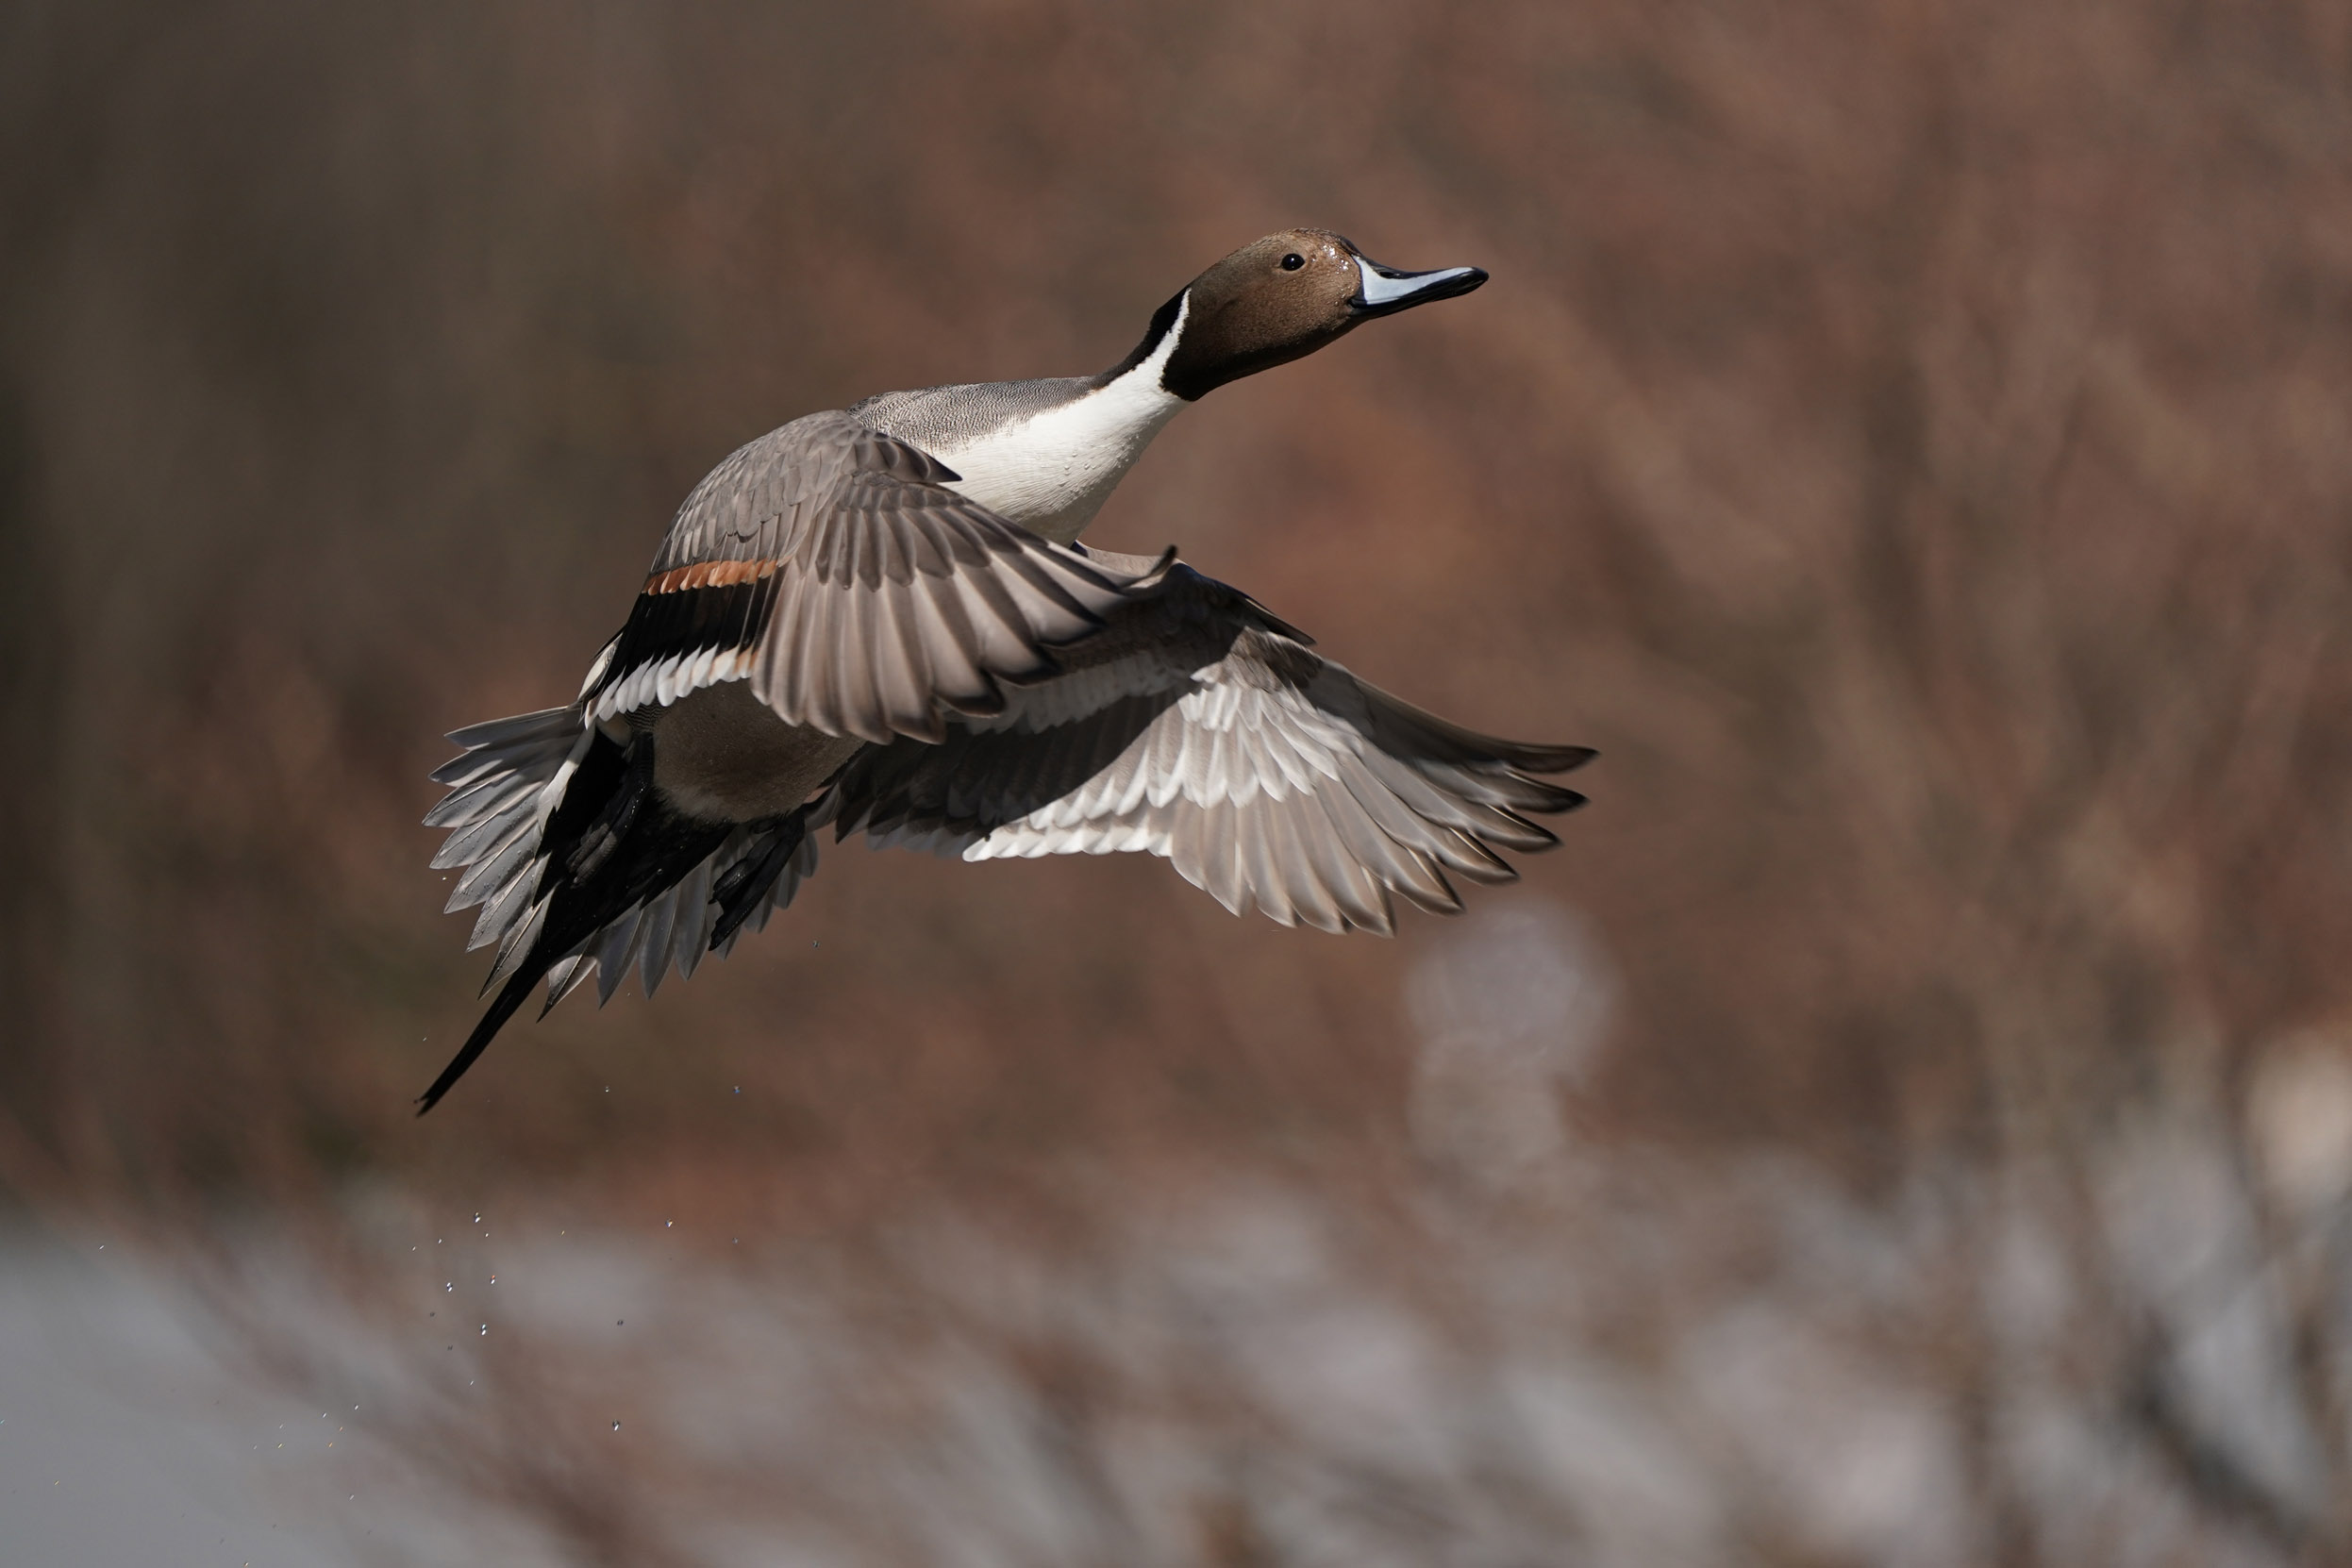 A lone Pintail flying against a background of forest.